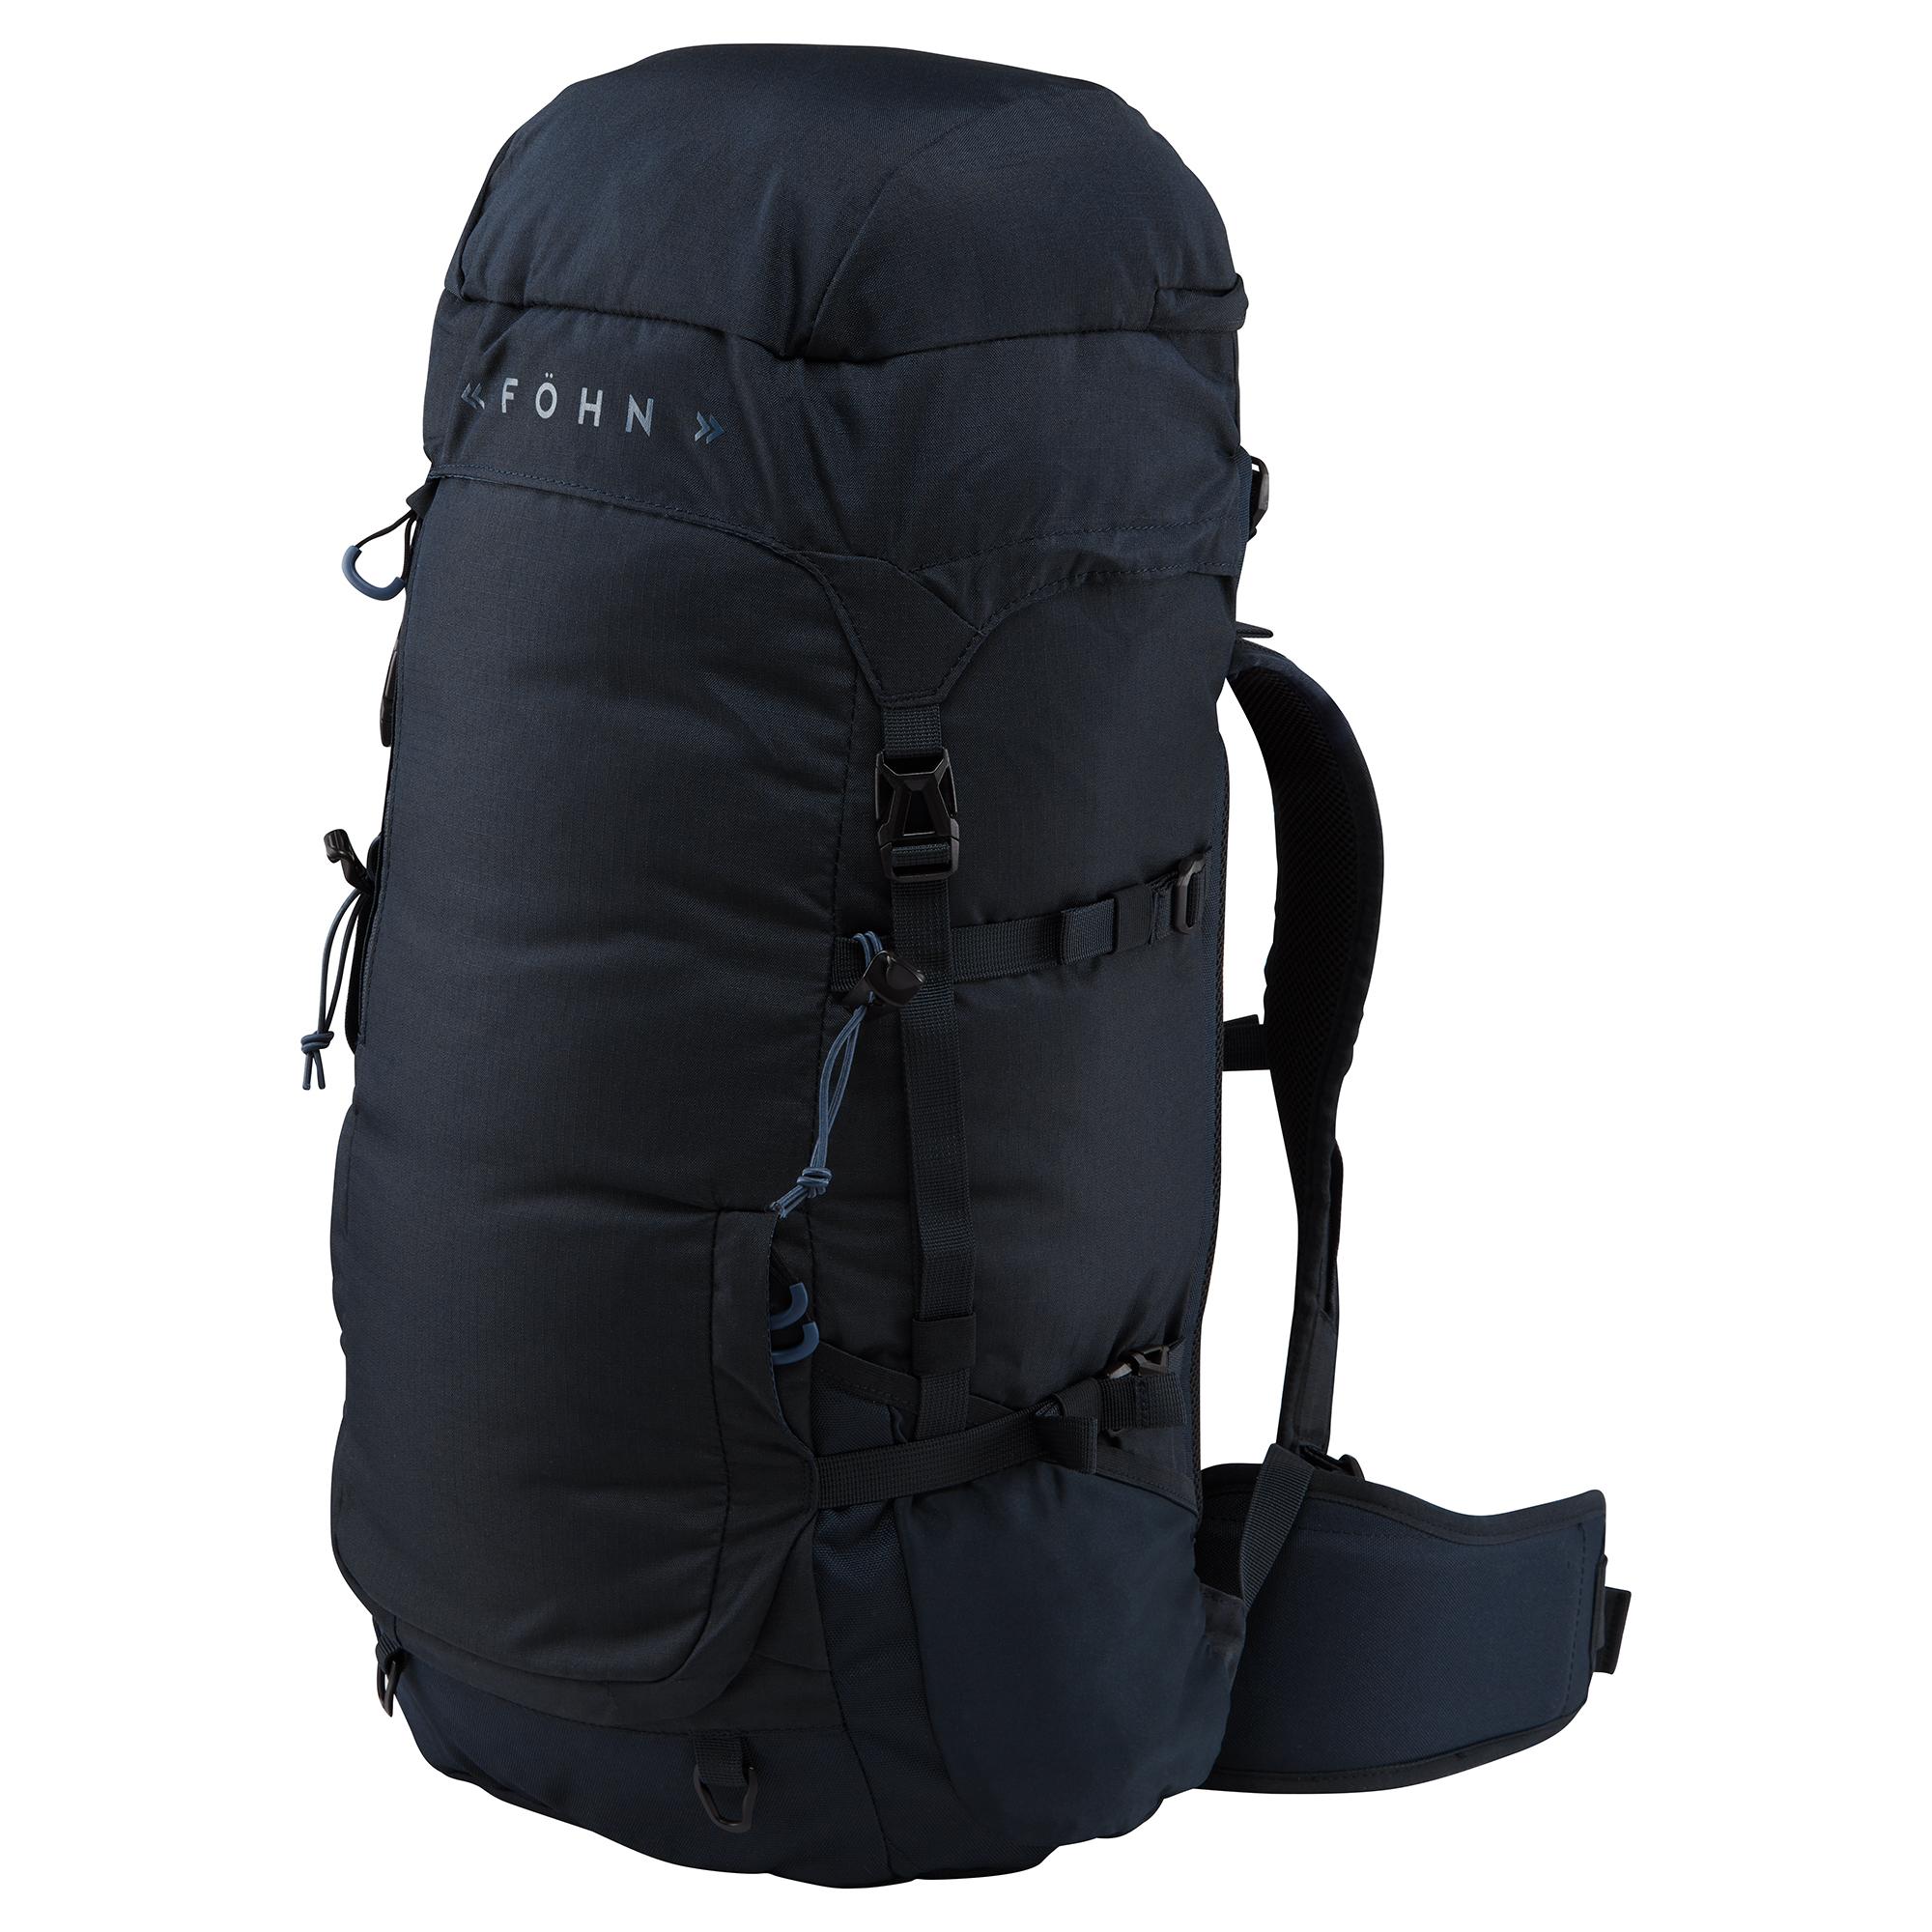 Fhn Hiking Pack (44l) - Navy